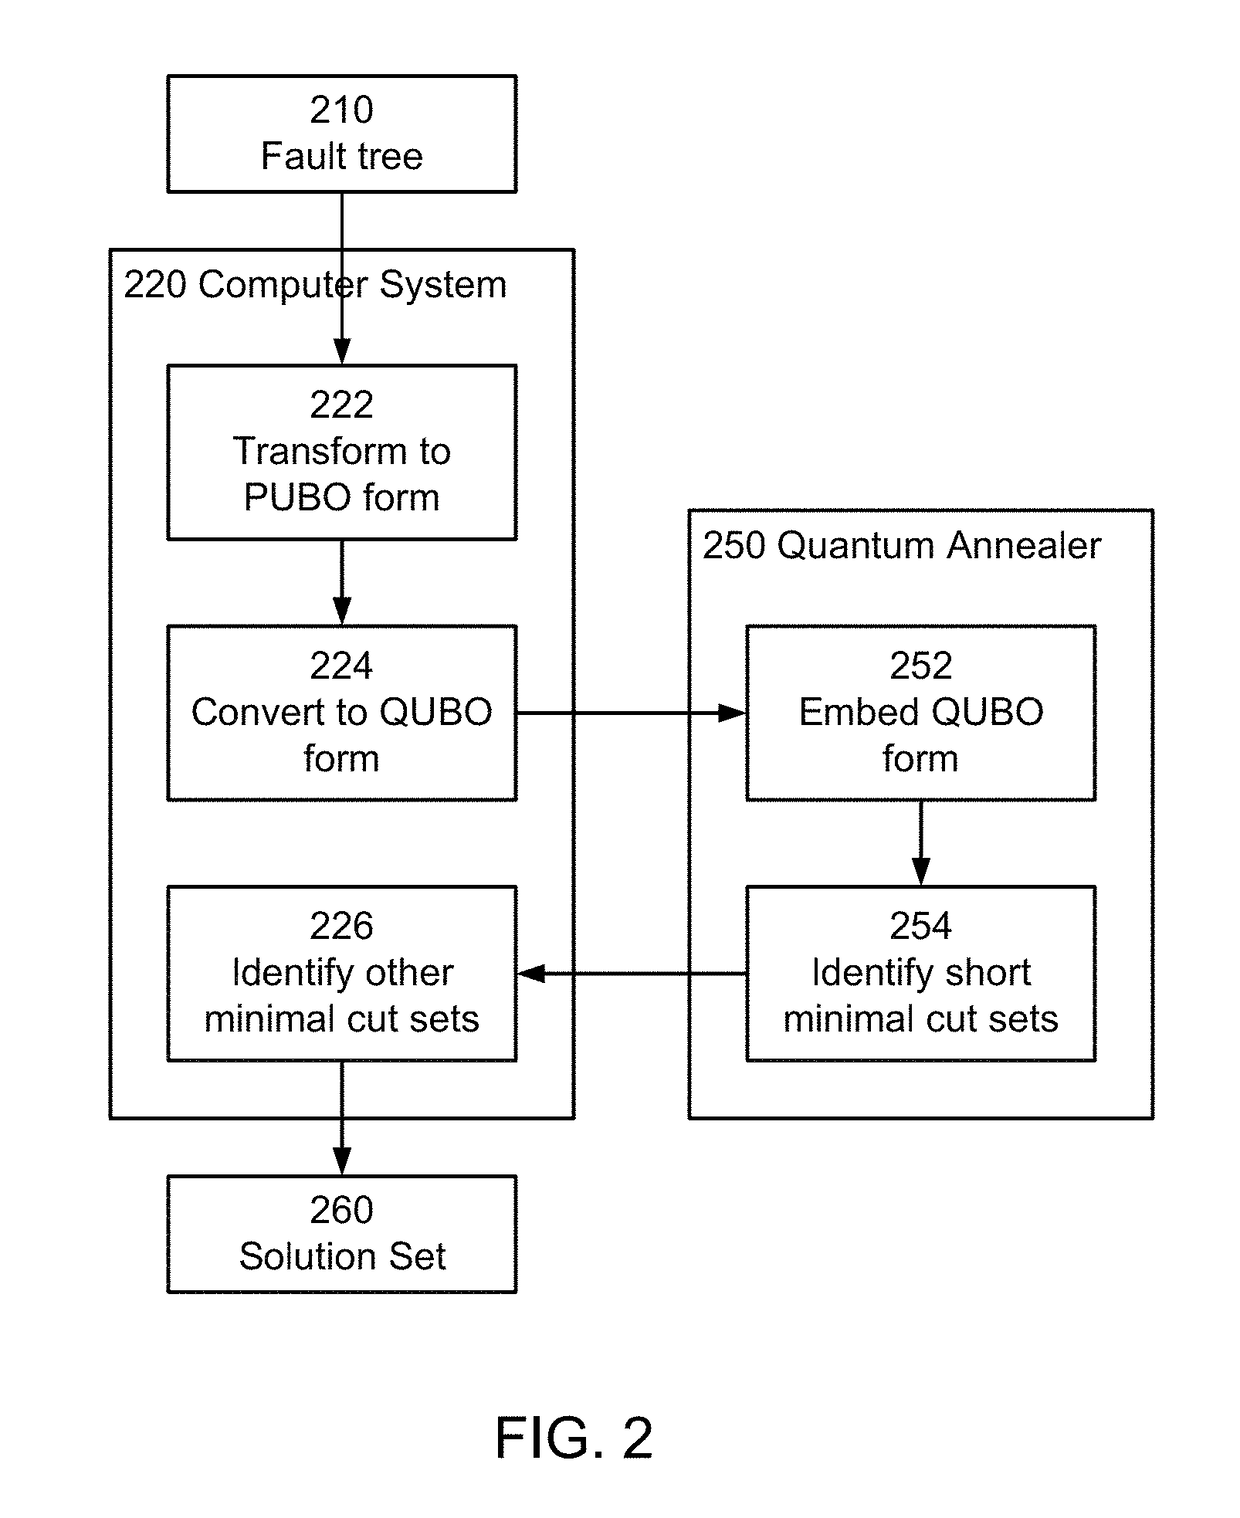 Performing fault tree analysis on quantum computers